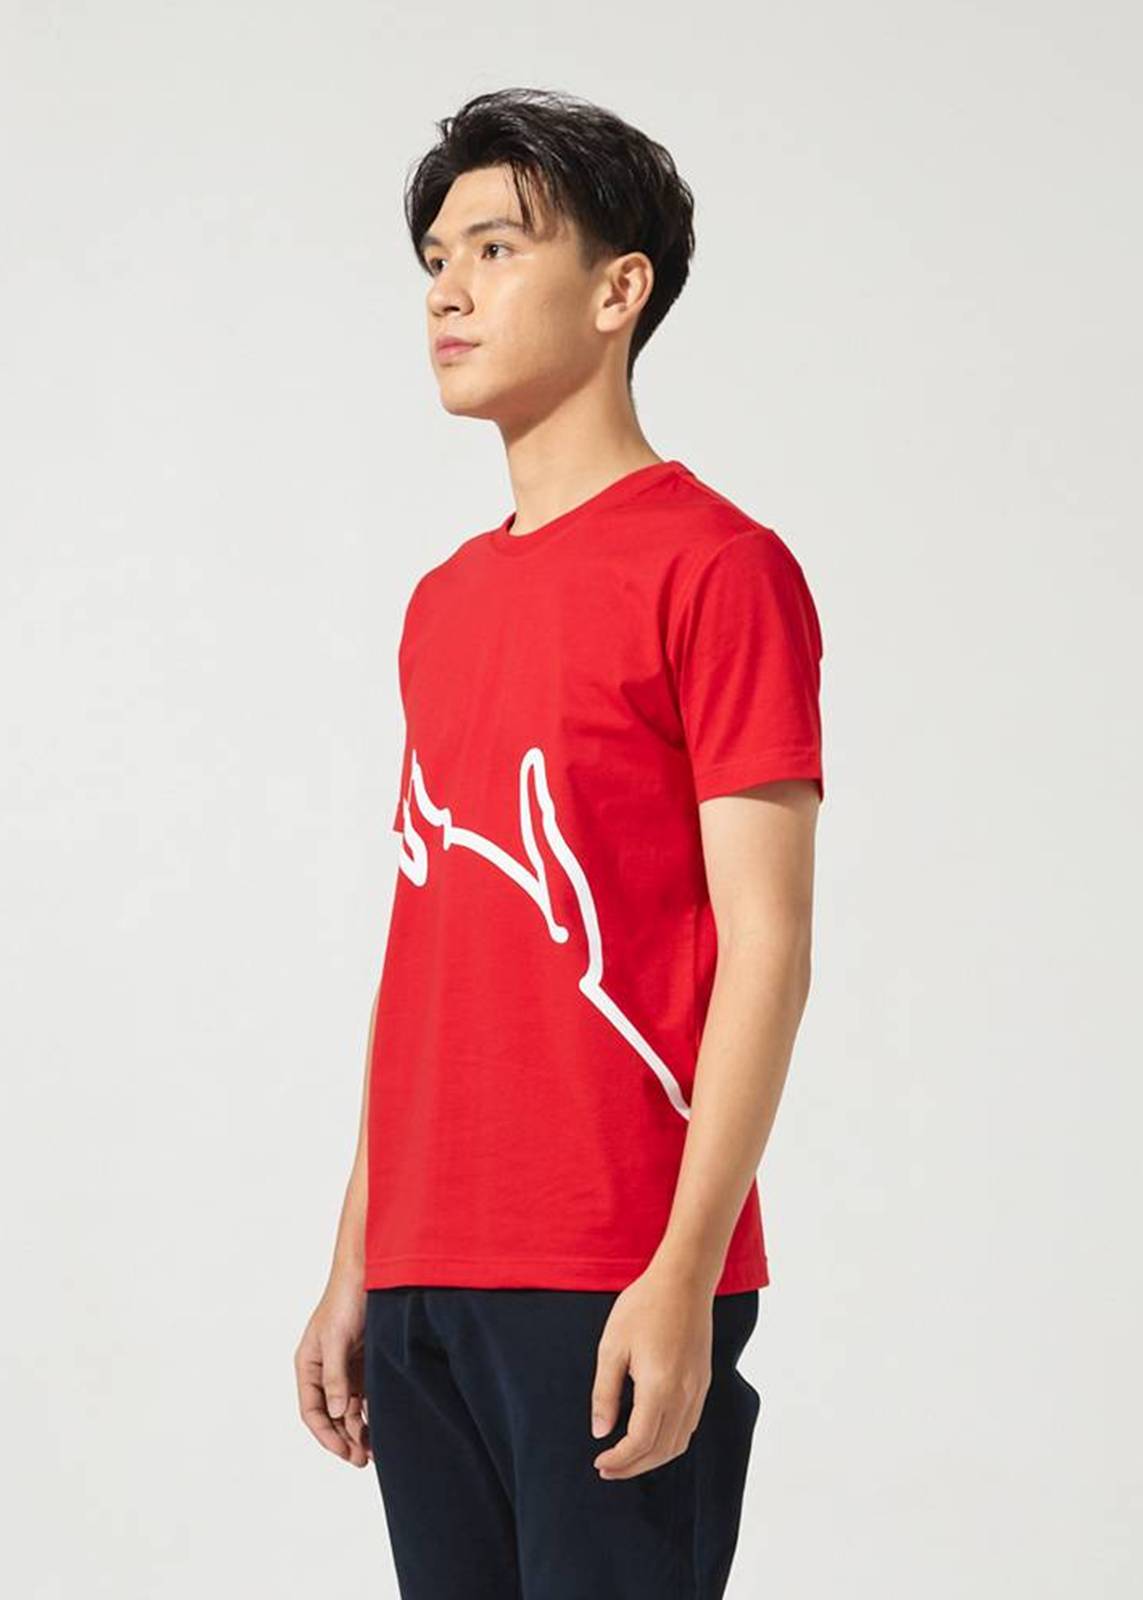 MOLTEN LAVA RED CUSTOM FIT T-SHIRT WITH GRAPHIC PRINT